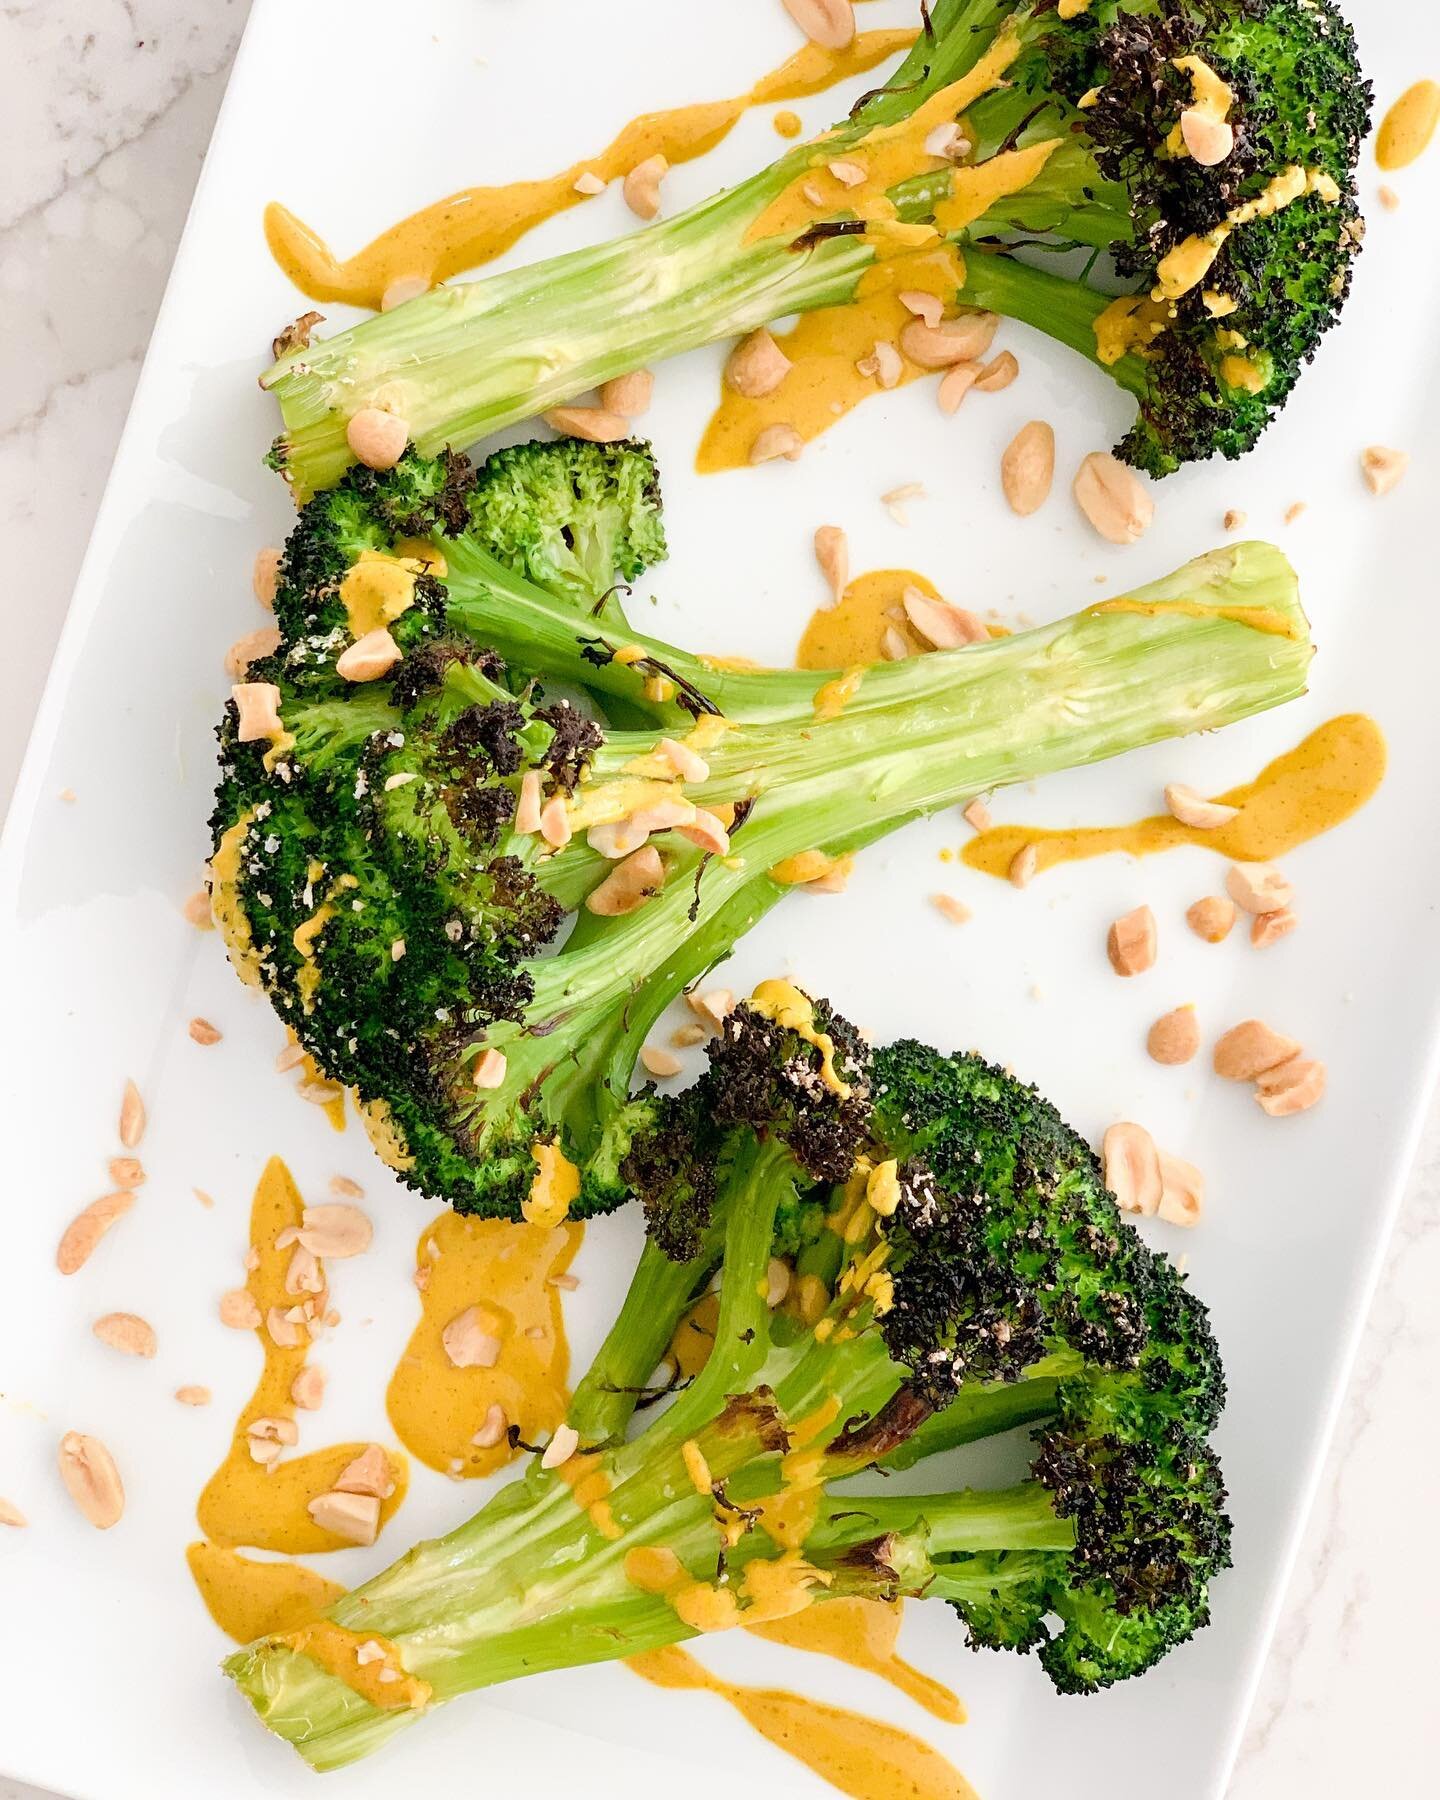 Are you throwing away your broccoli stems? STOP ✋😄 They&rsquo;re actually one of the most delicious parts of this vegetable!

Don&rsquo;t believe me? Try this method for cooking the stem &amp; crown together &amp; tell me what you think. I love it s